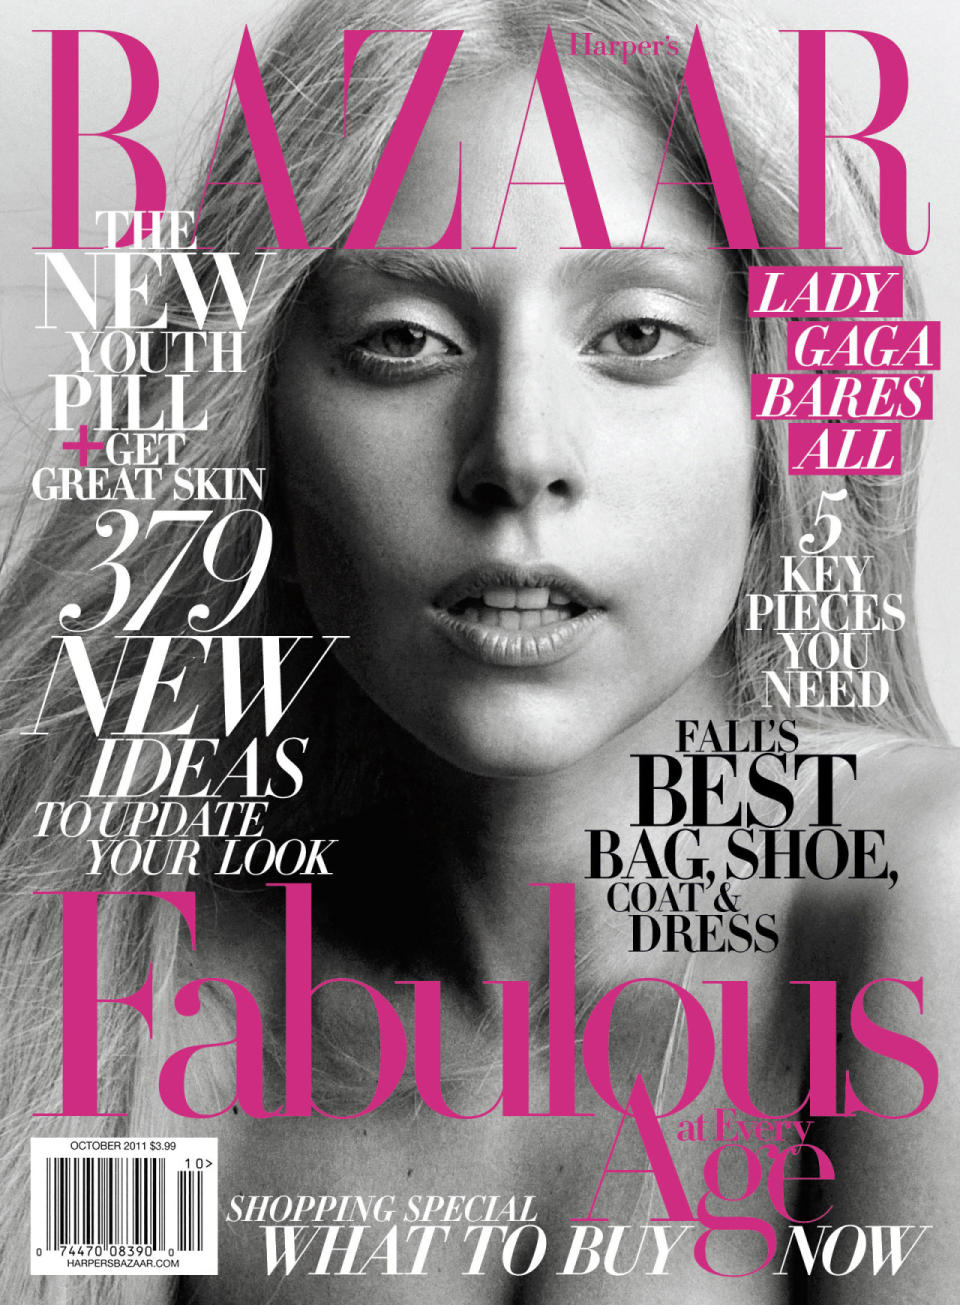 Lady Gaga on the October 2011 cover of "Harper’s Bazaar.”